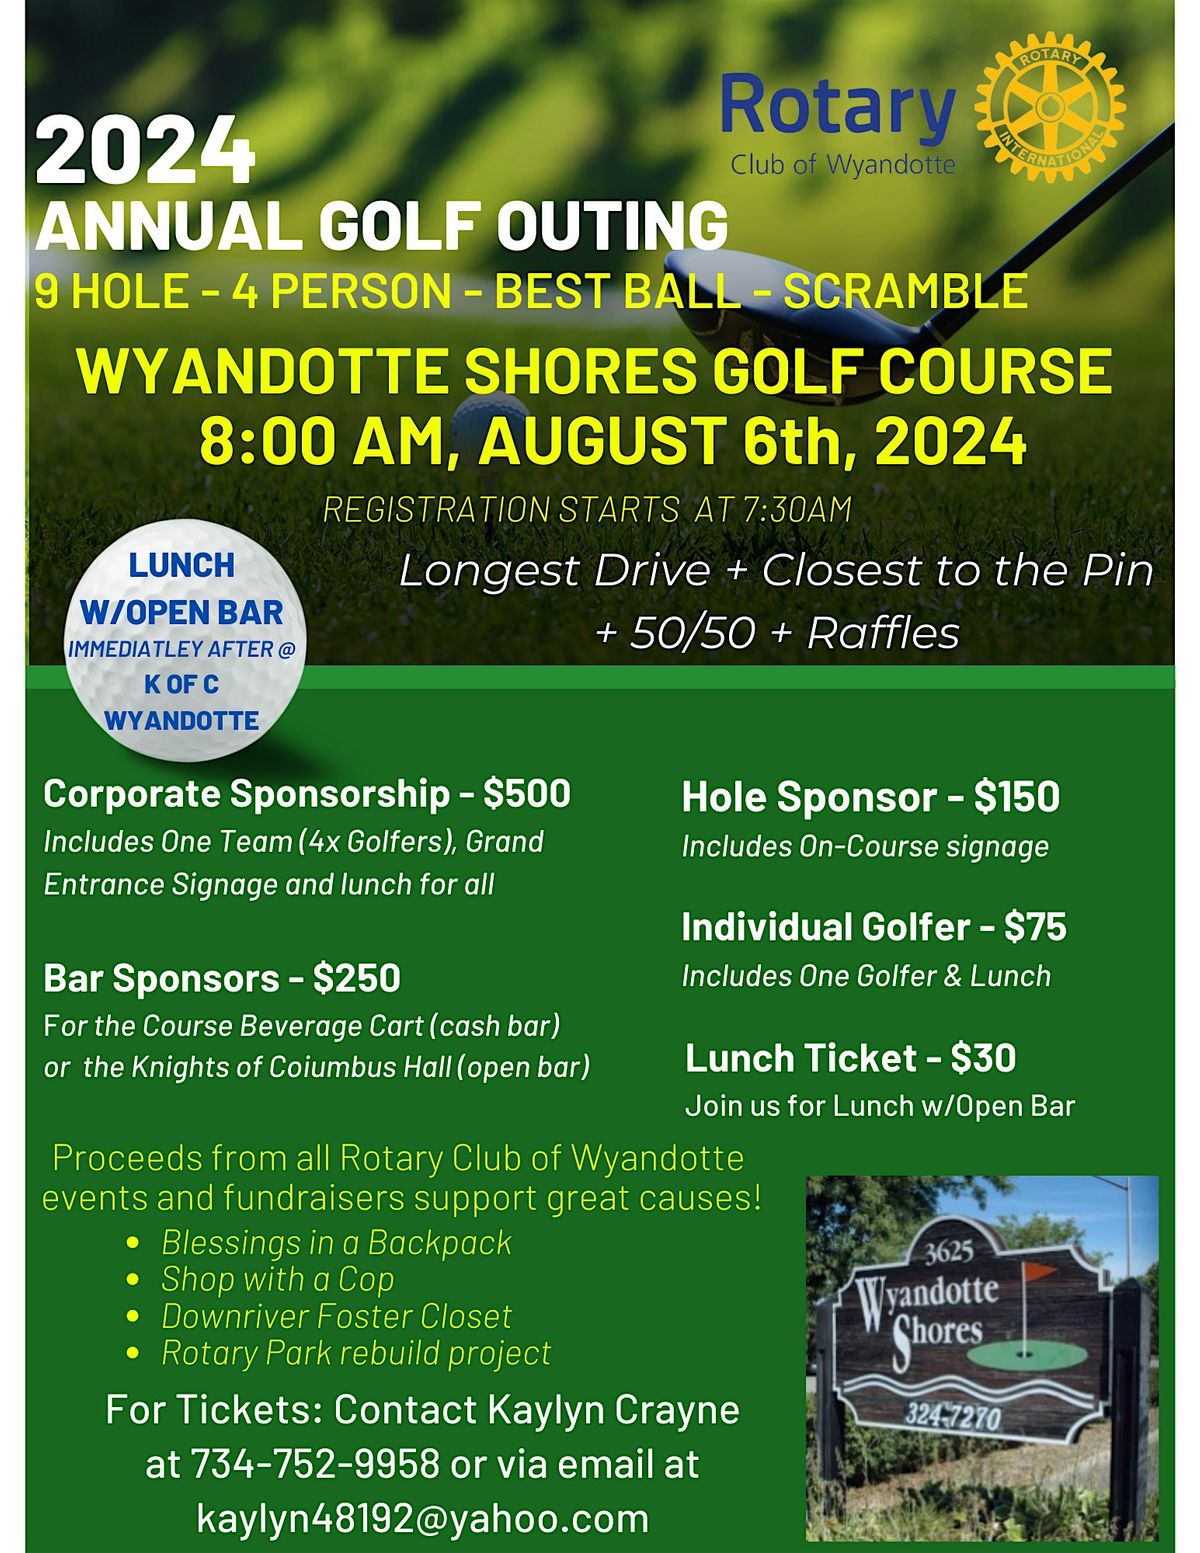 2024 Wyandotte Rotary Golf Outing